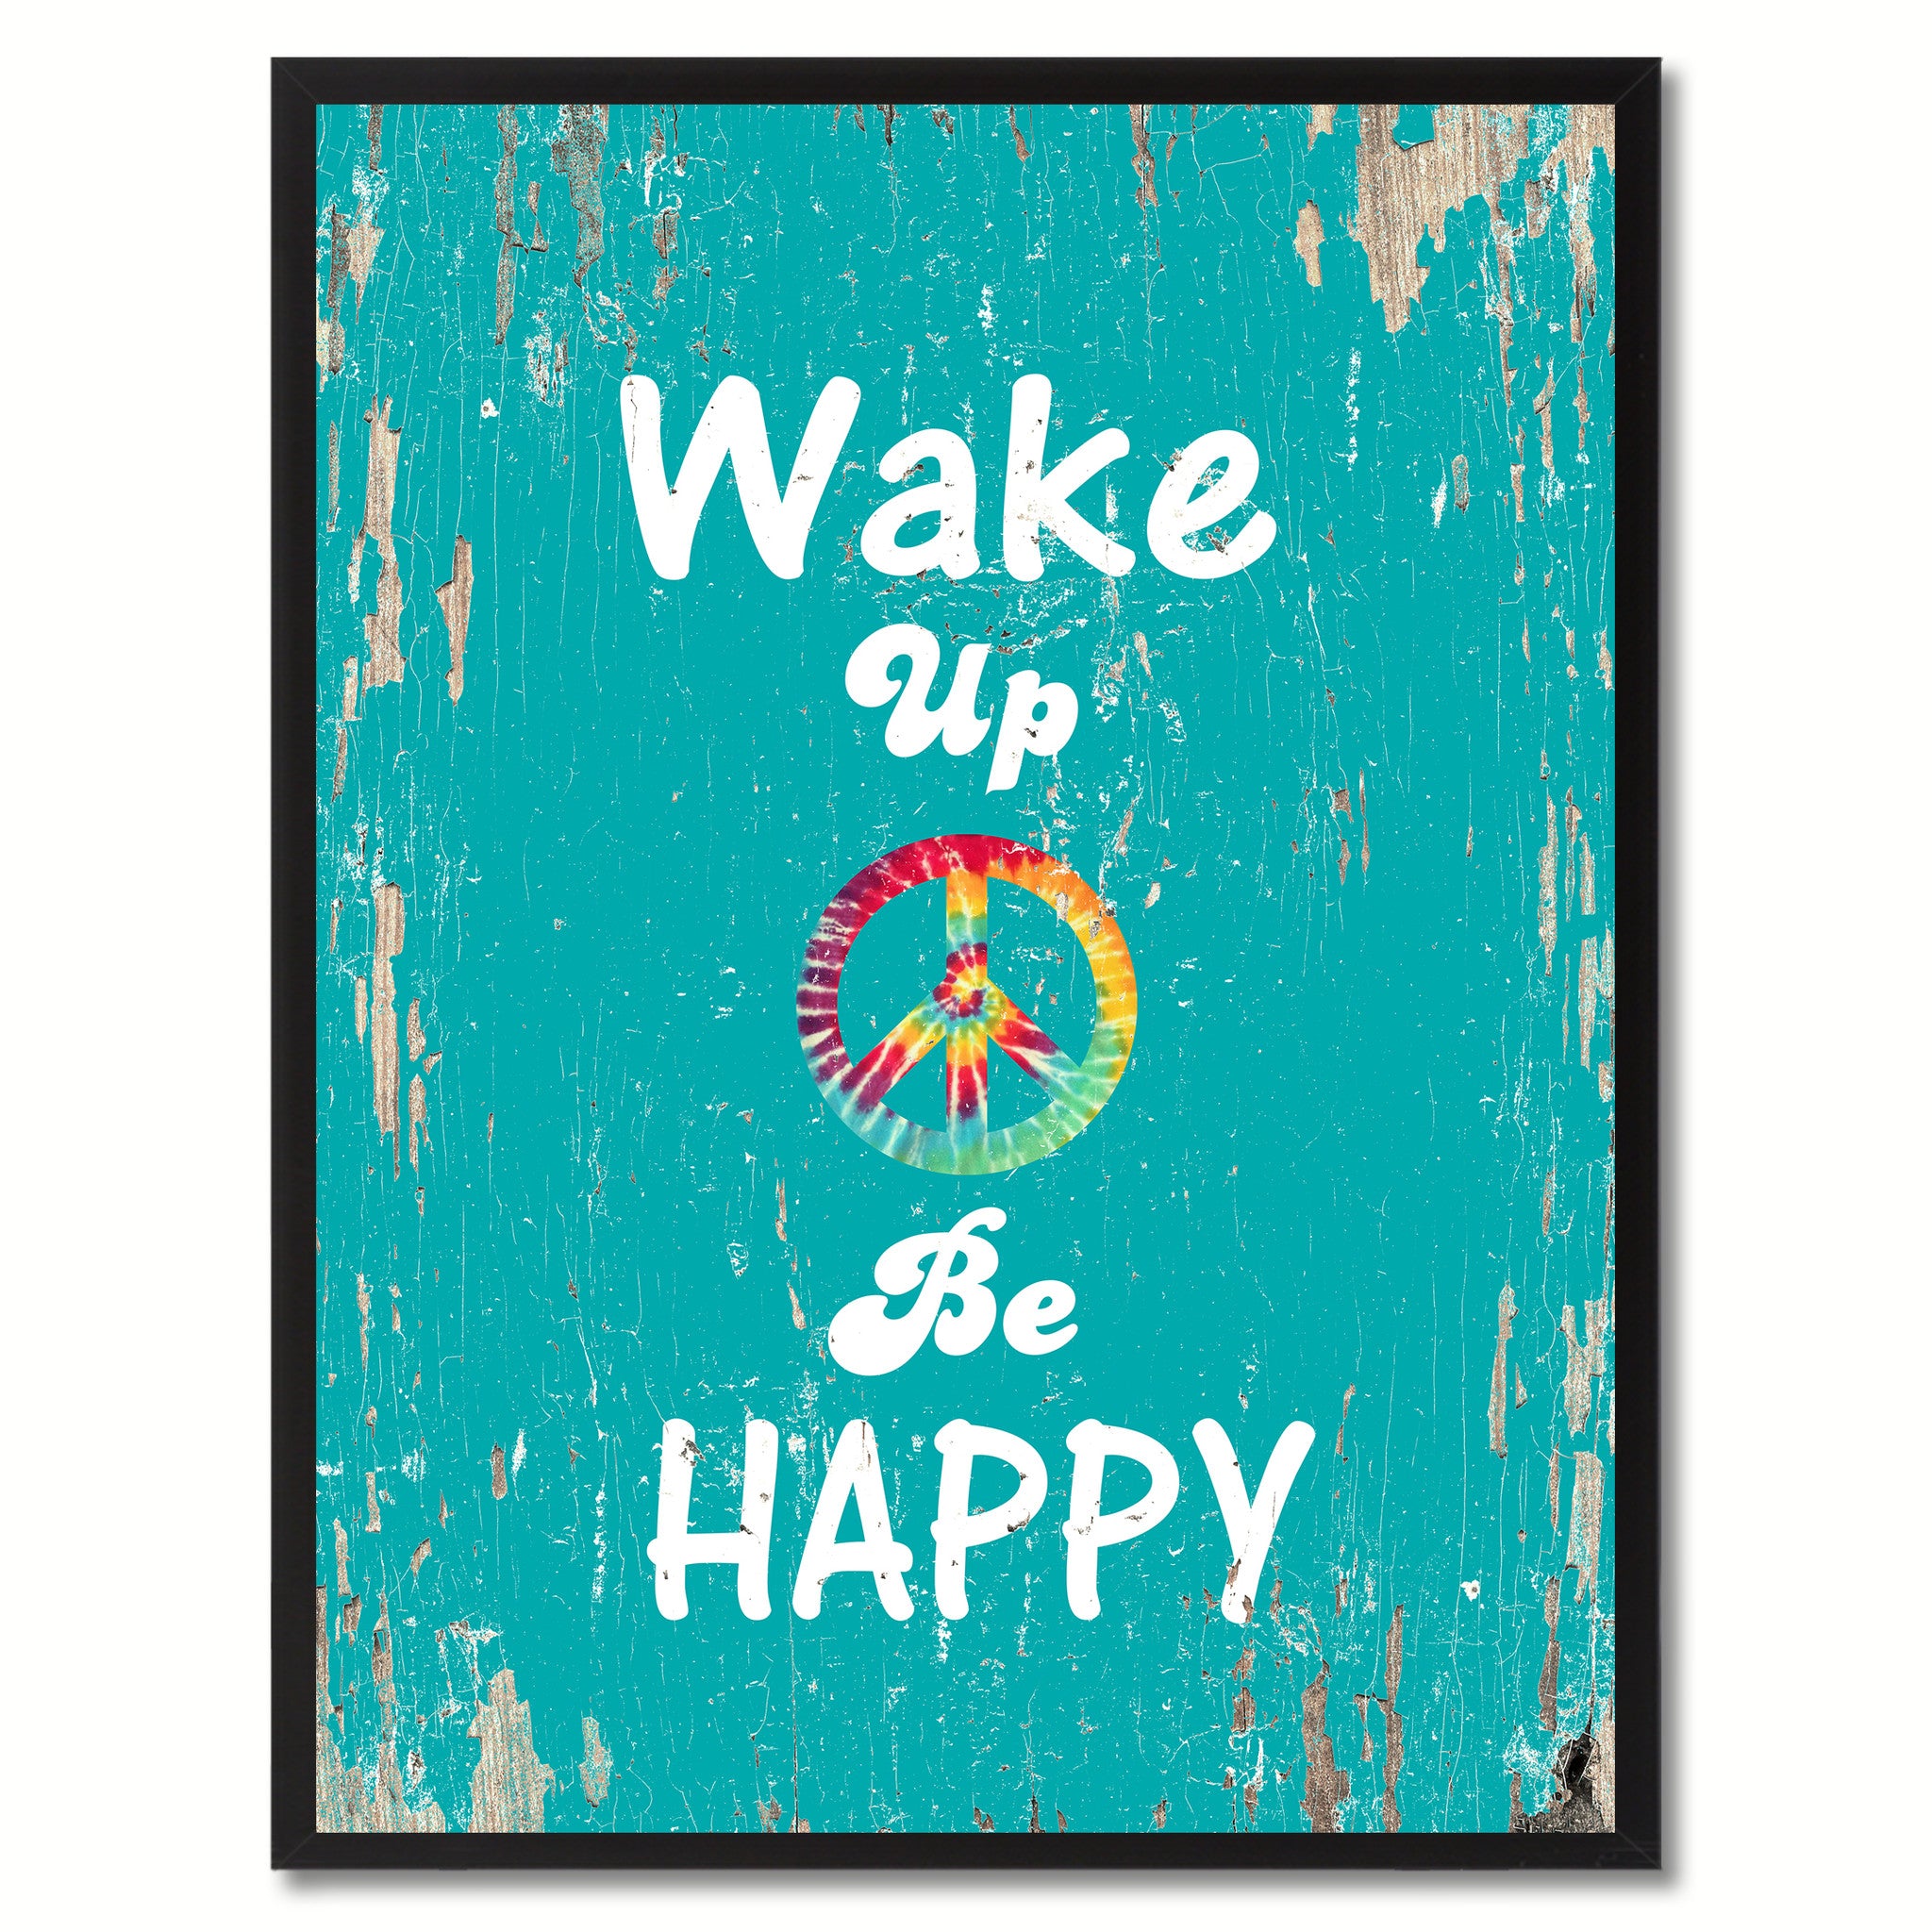 Wake Up & Be Happy Saying Canvas Print, Black Picture Frame Home Decor Wall Art Gifts